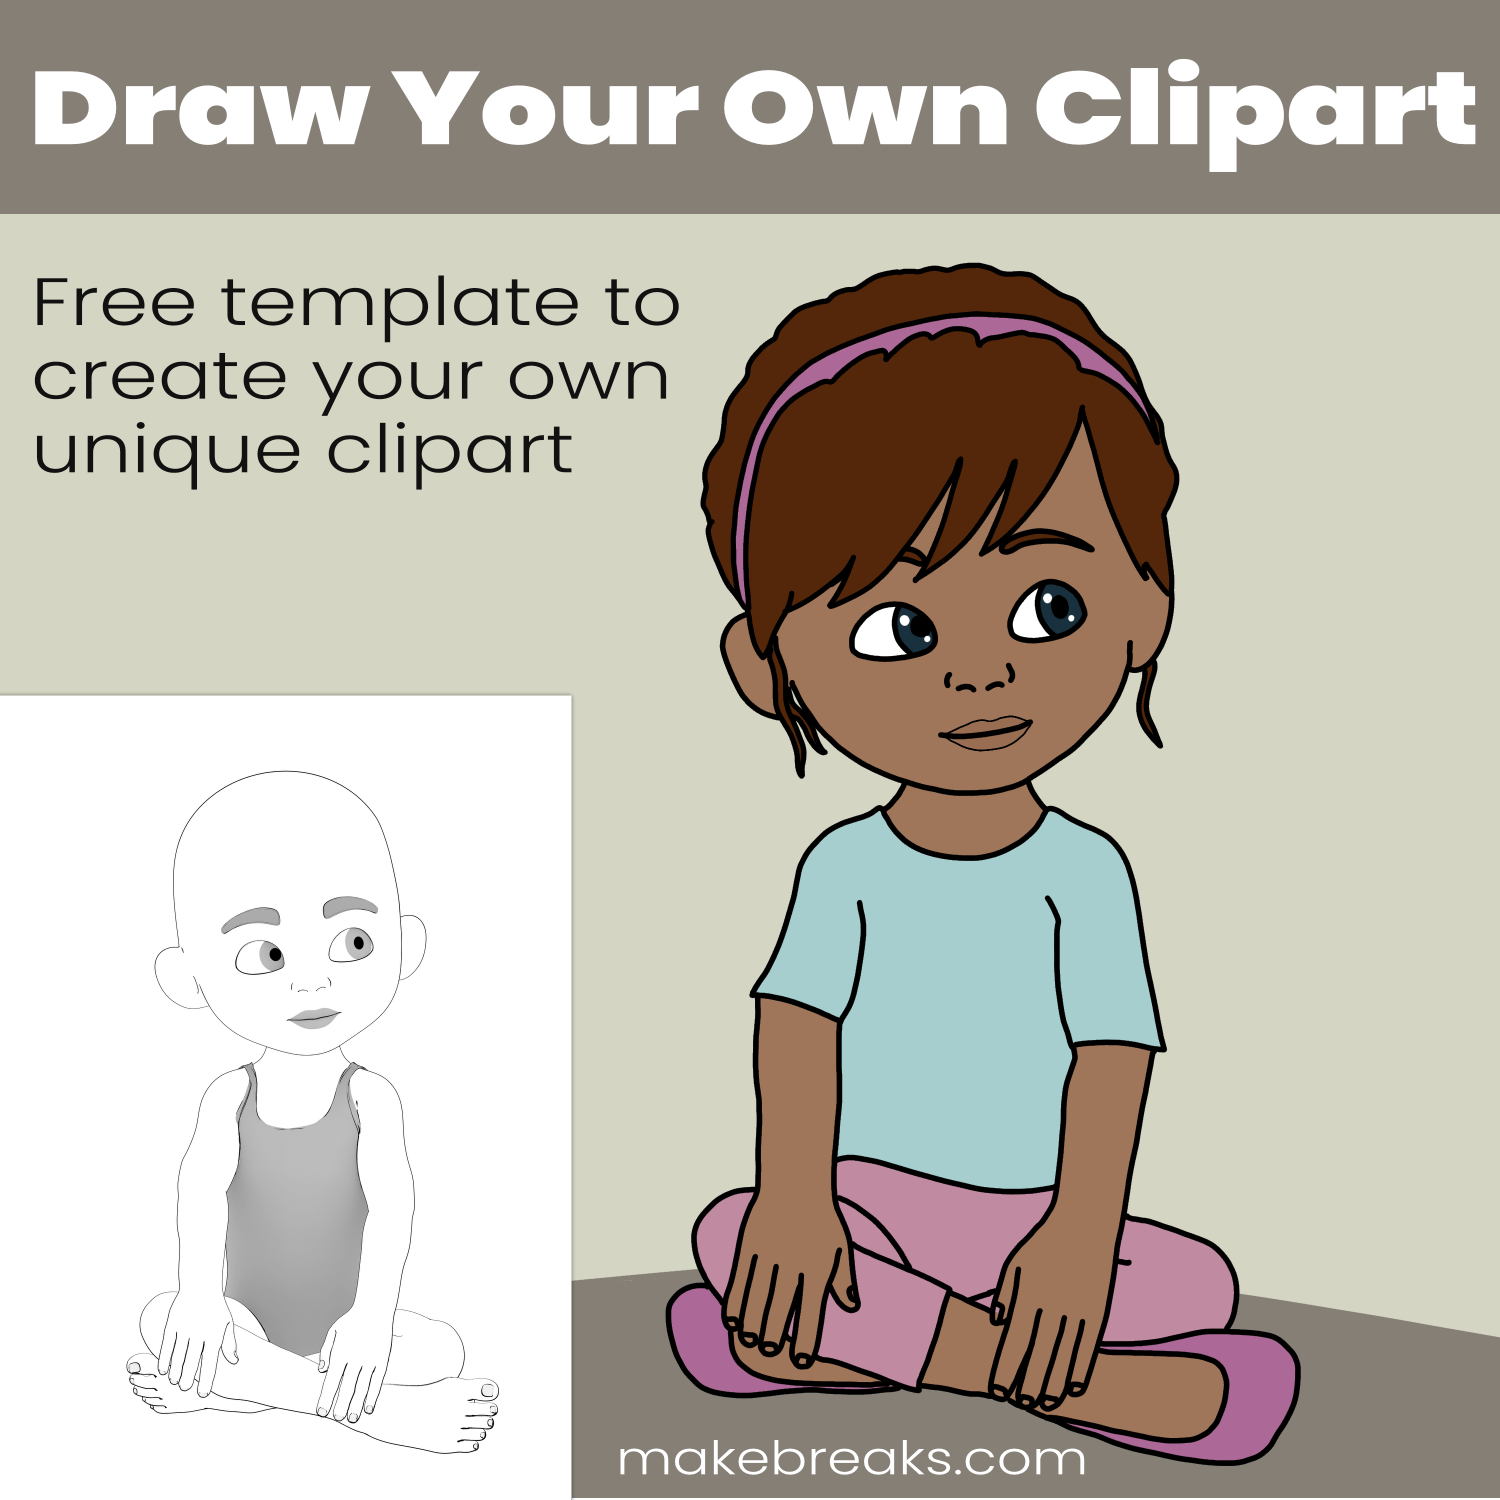 Draw Your Own Clipart – Free Template